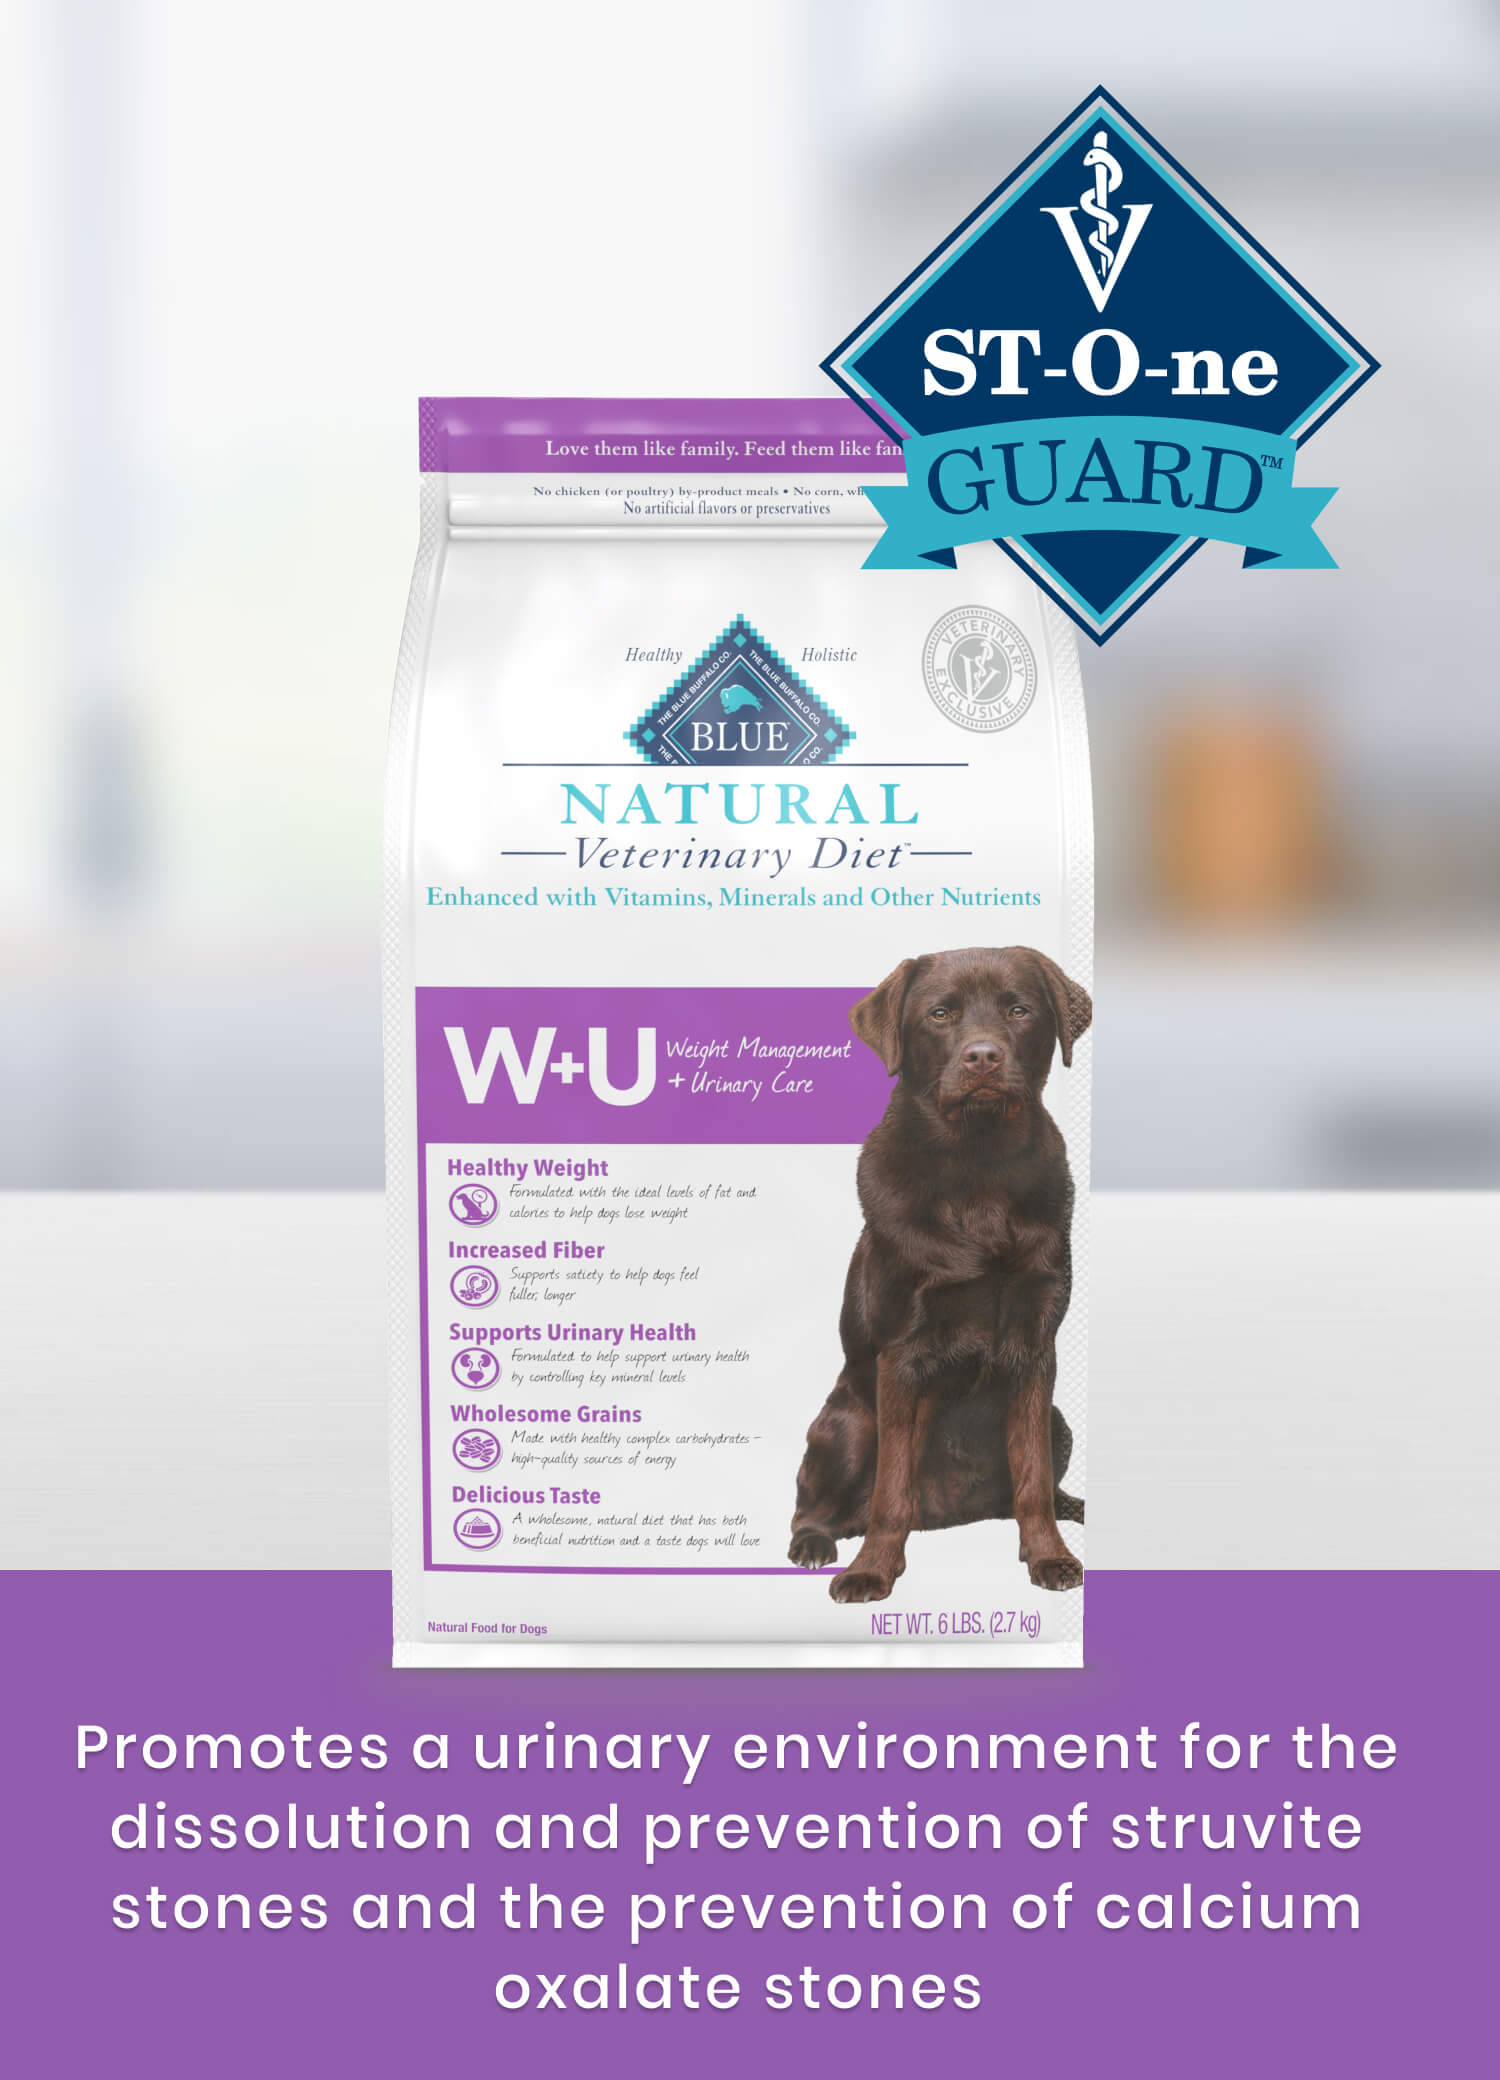 W+U Weight Management + Urinary Care St-O-ne Guard Promotes a urinary environment for the dissolution and prevention of struvite stones and the prevention of calcium oxalate stones.